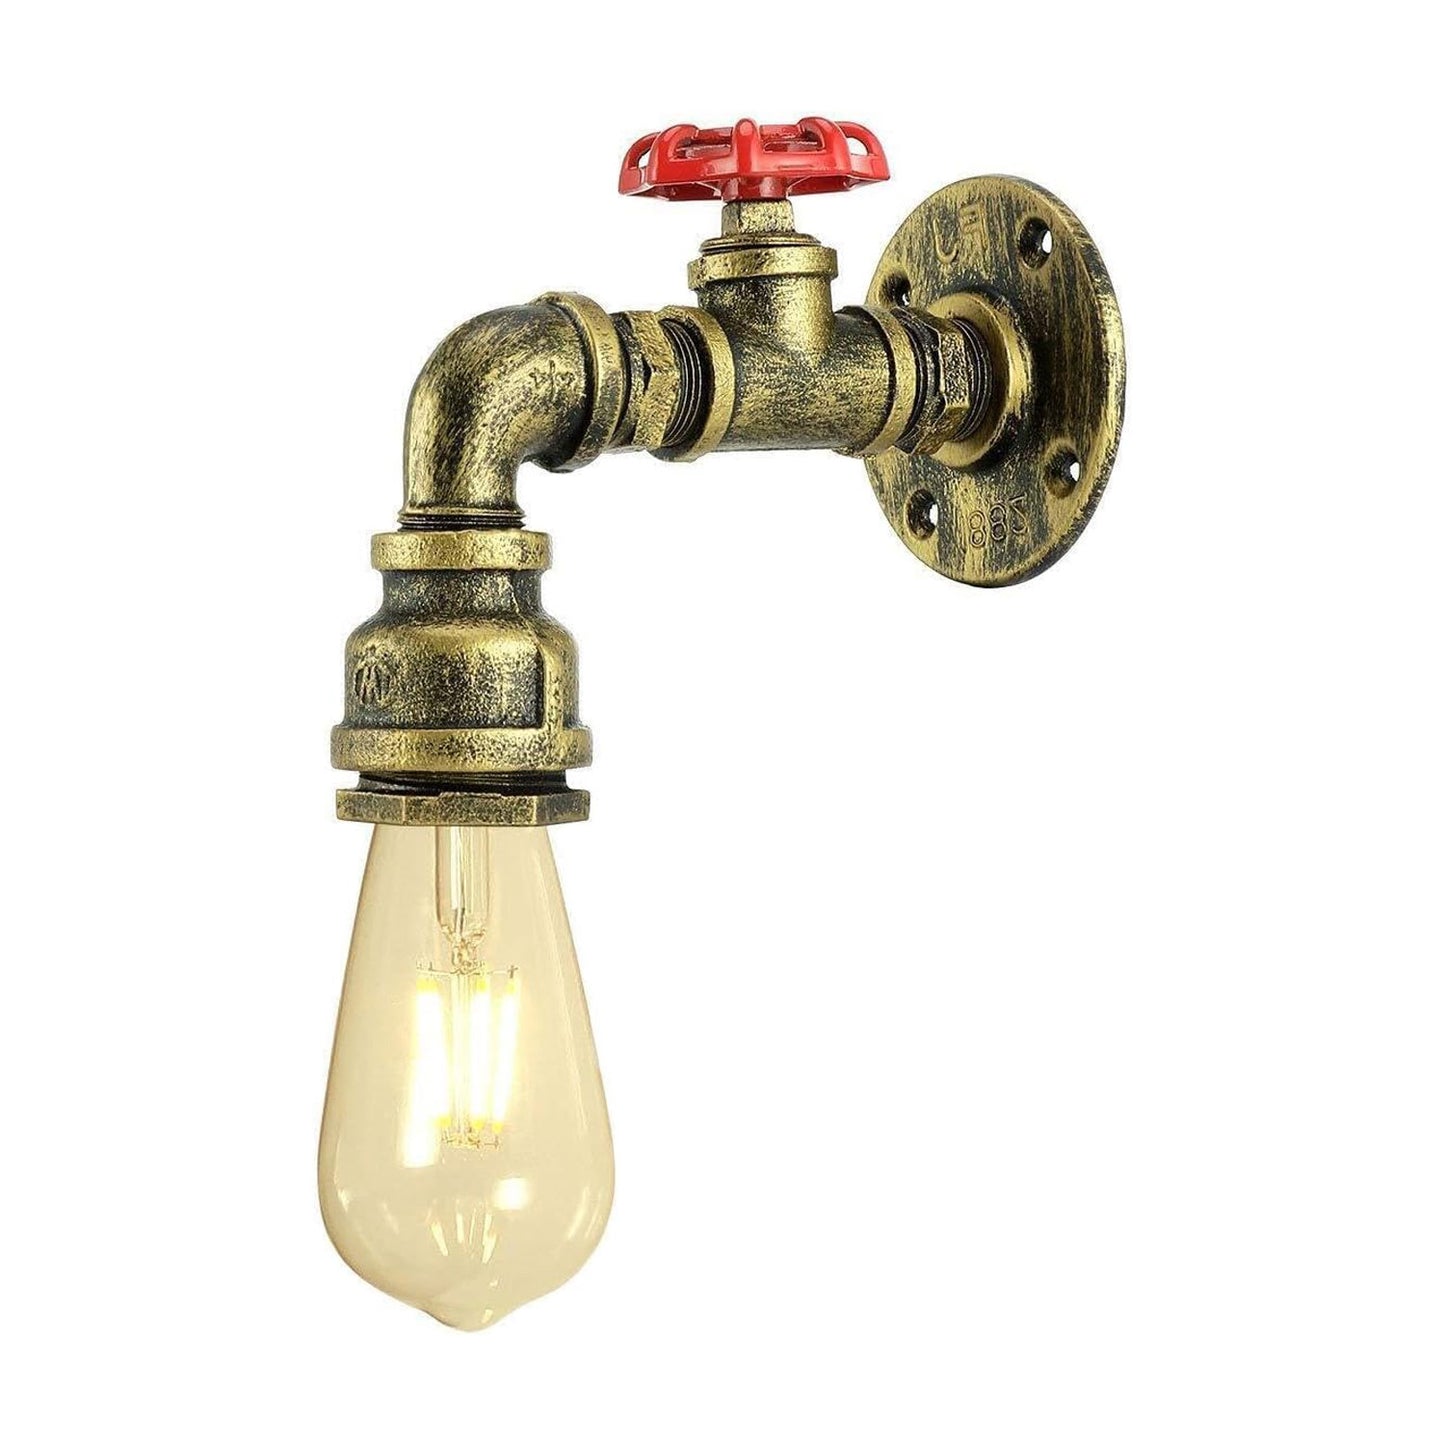 Water Pipe Lamp Retro Metal Steampunk Brushed Brass Wall Sconce